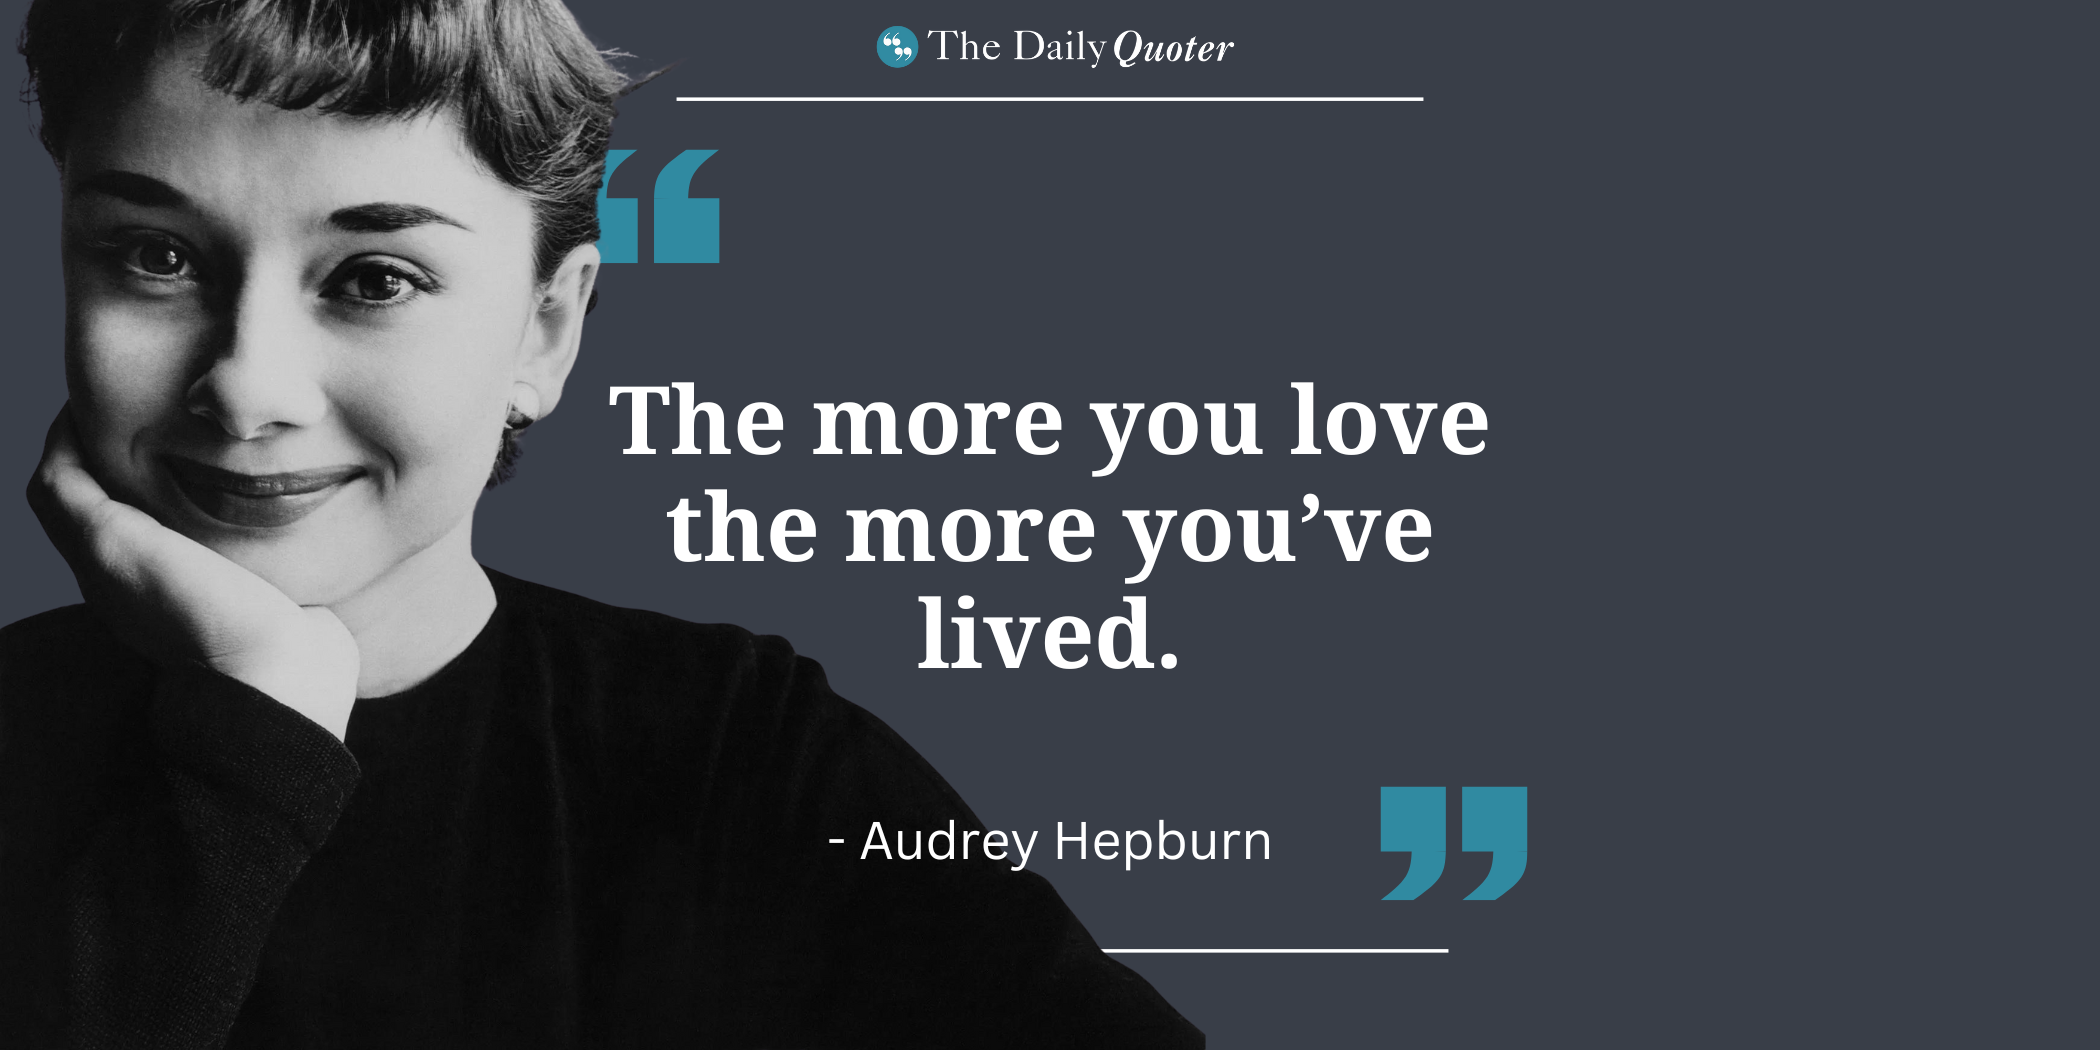 "I do not believe in an afterlife, but I believe in love. The more you love the more you’ve lived." – Audrey Hepburn